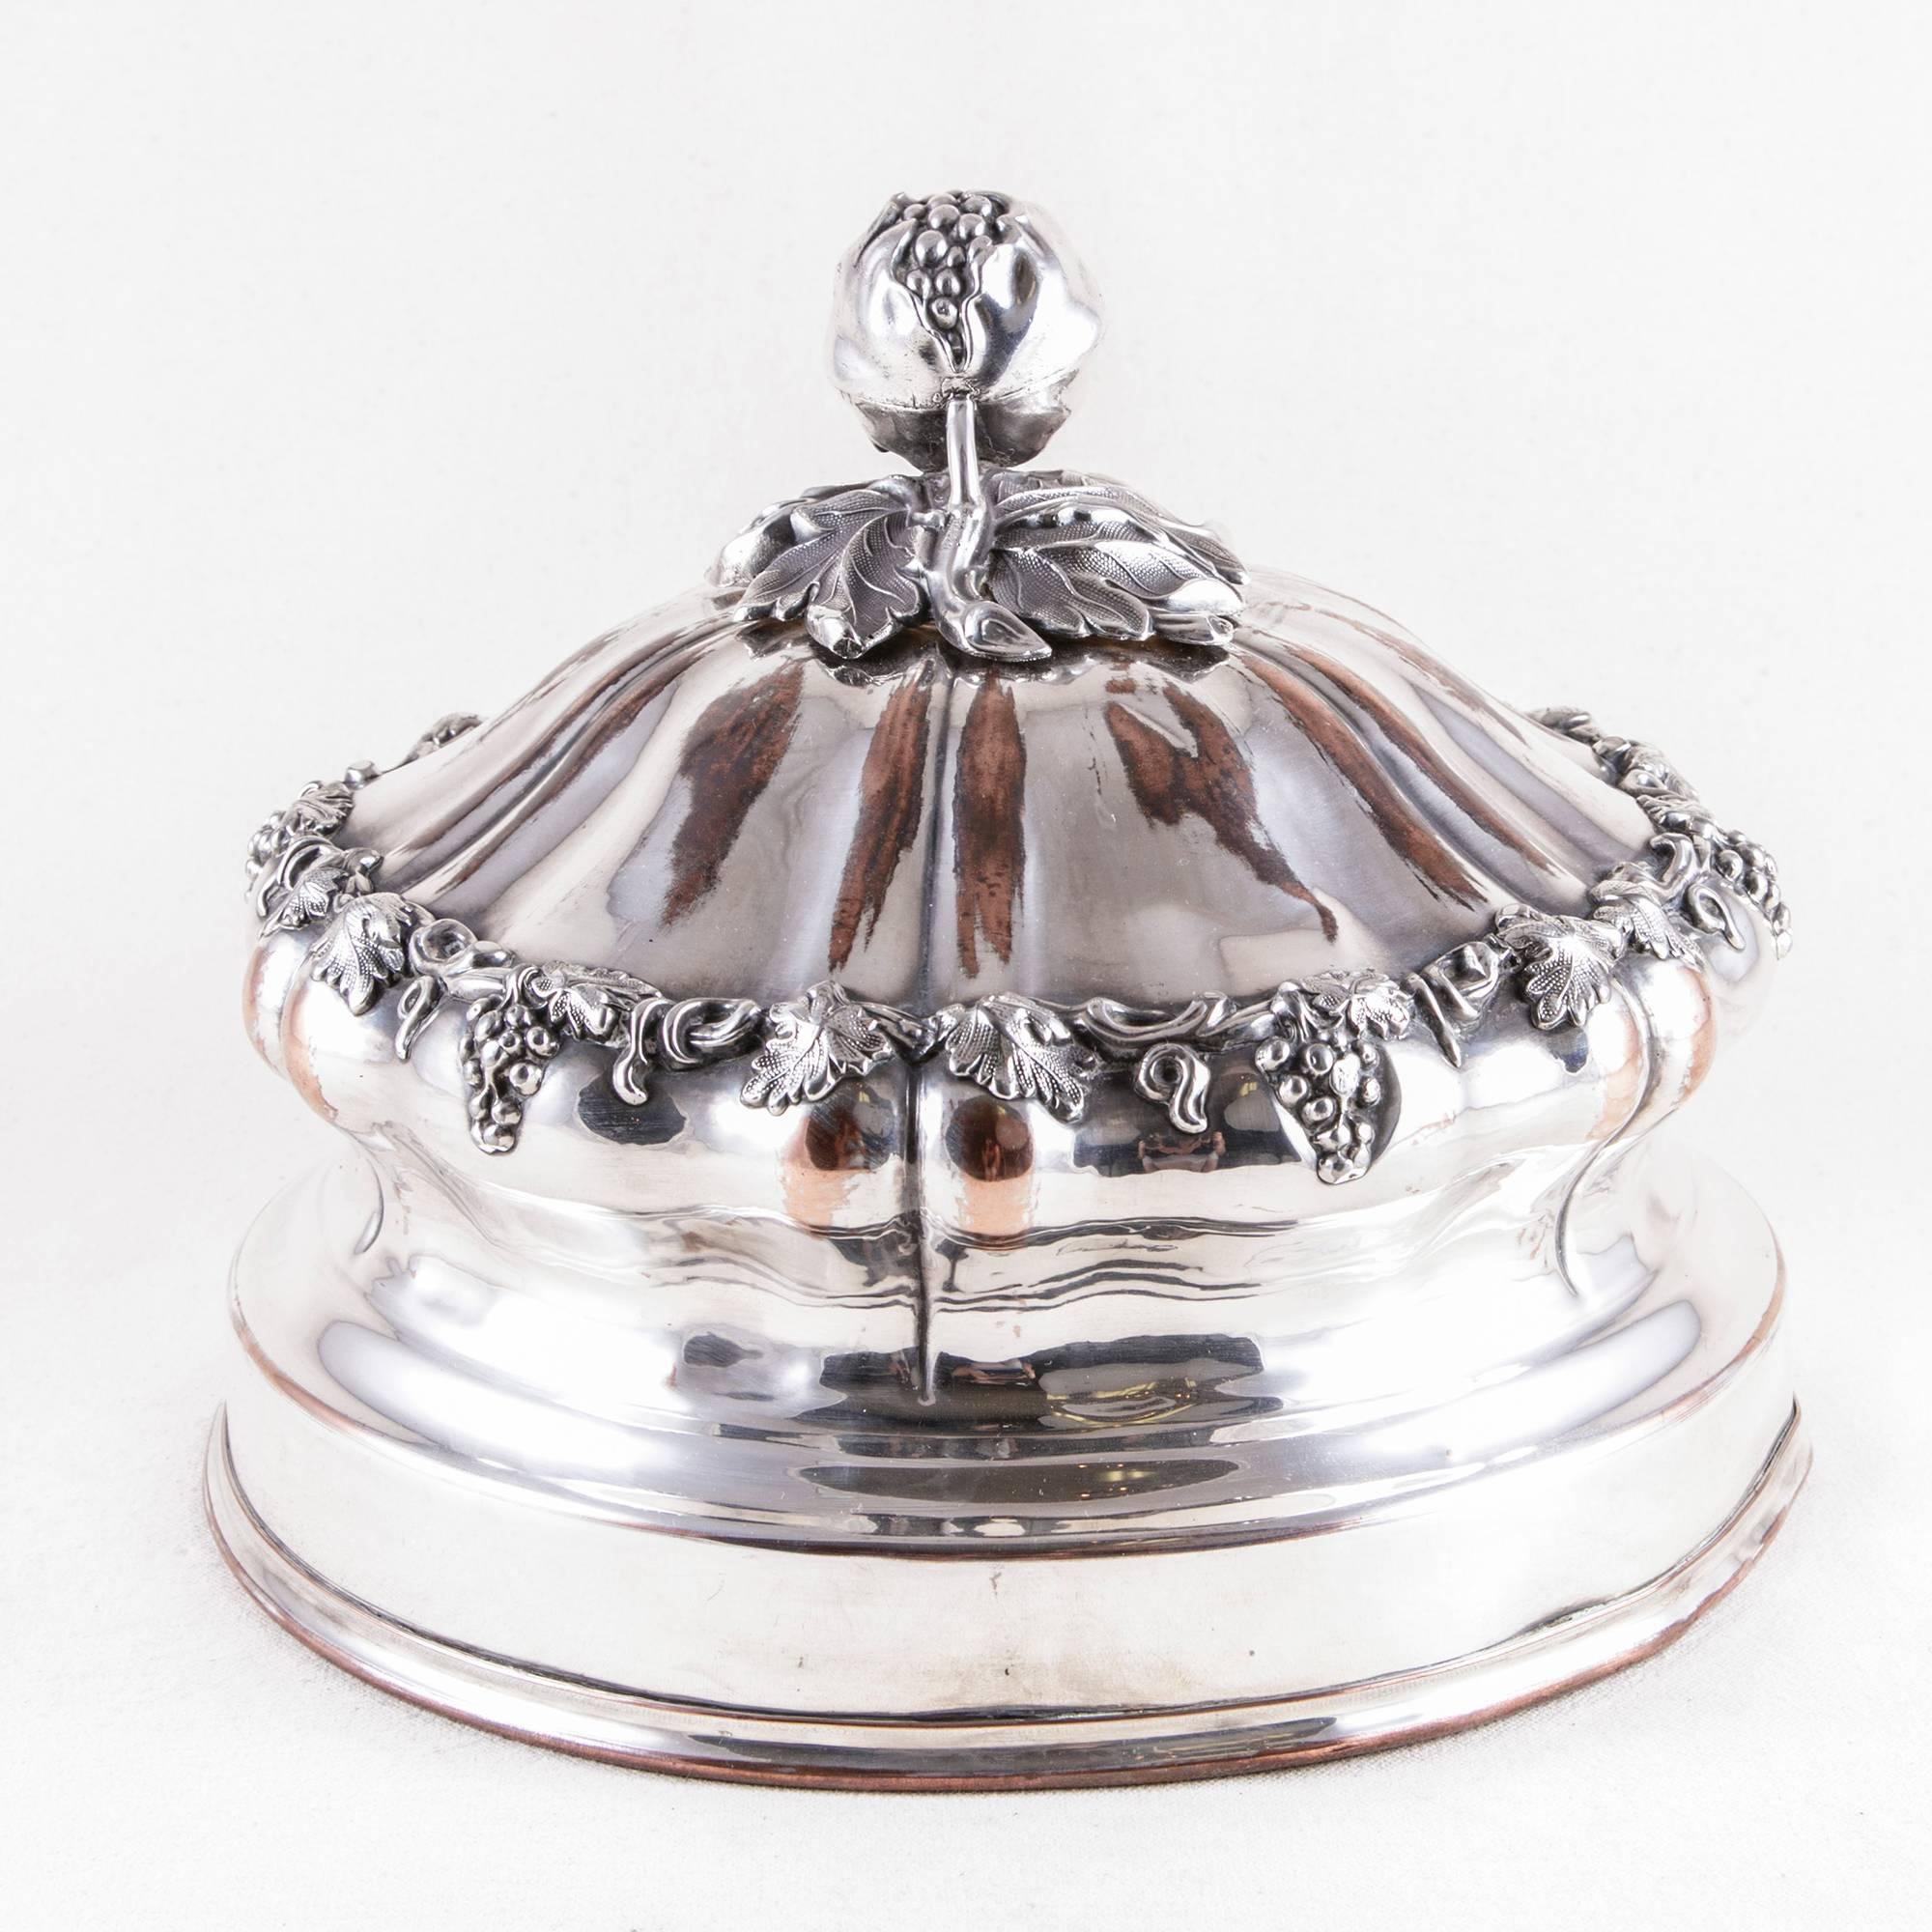 19th Century French Silver Hotel Dome Serving Piece Food Warmer Dish Cover 1